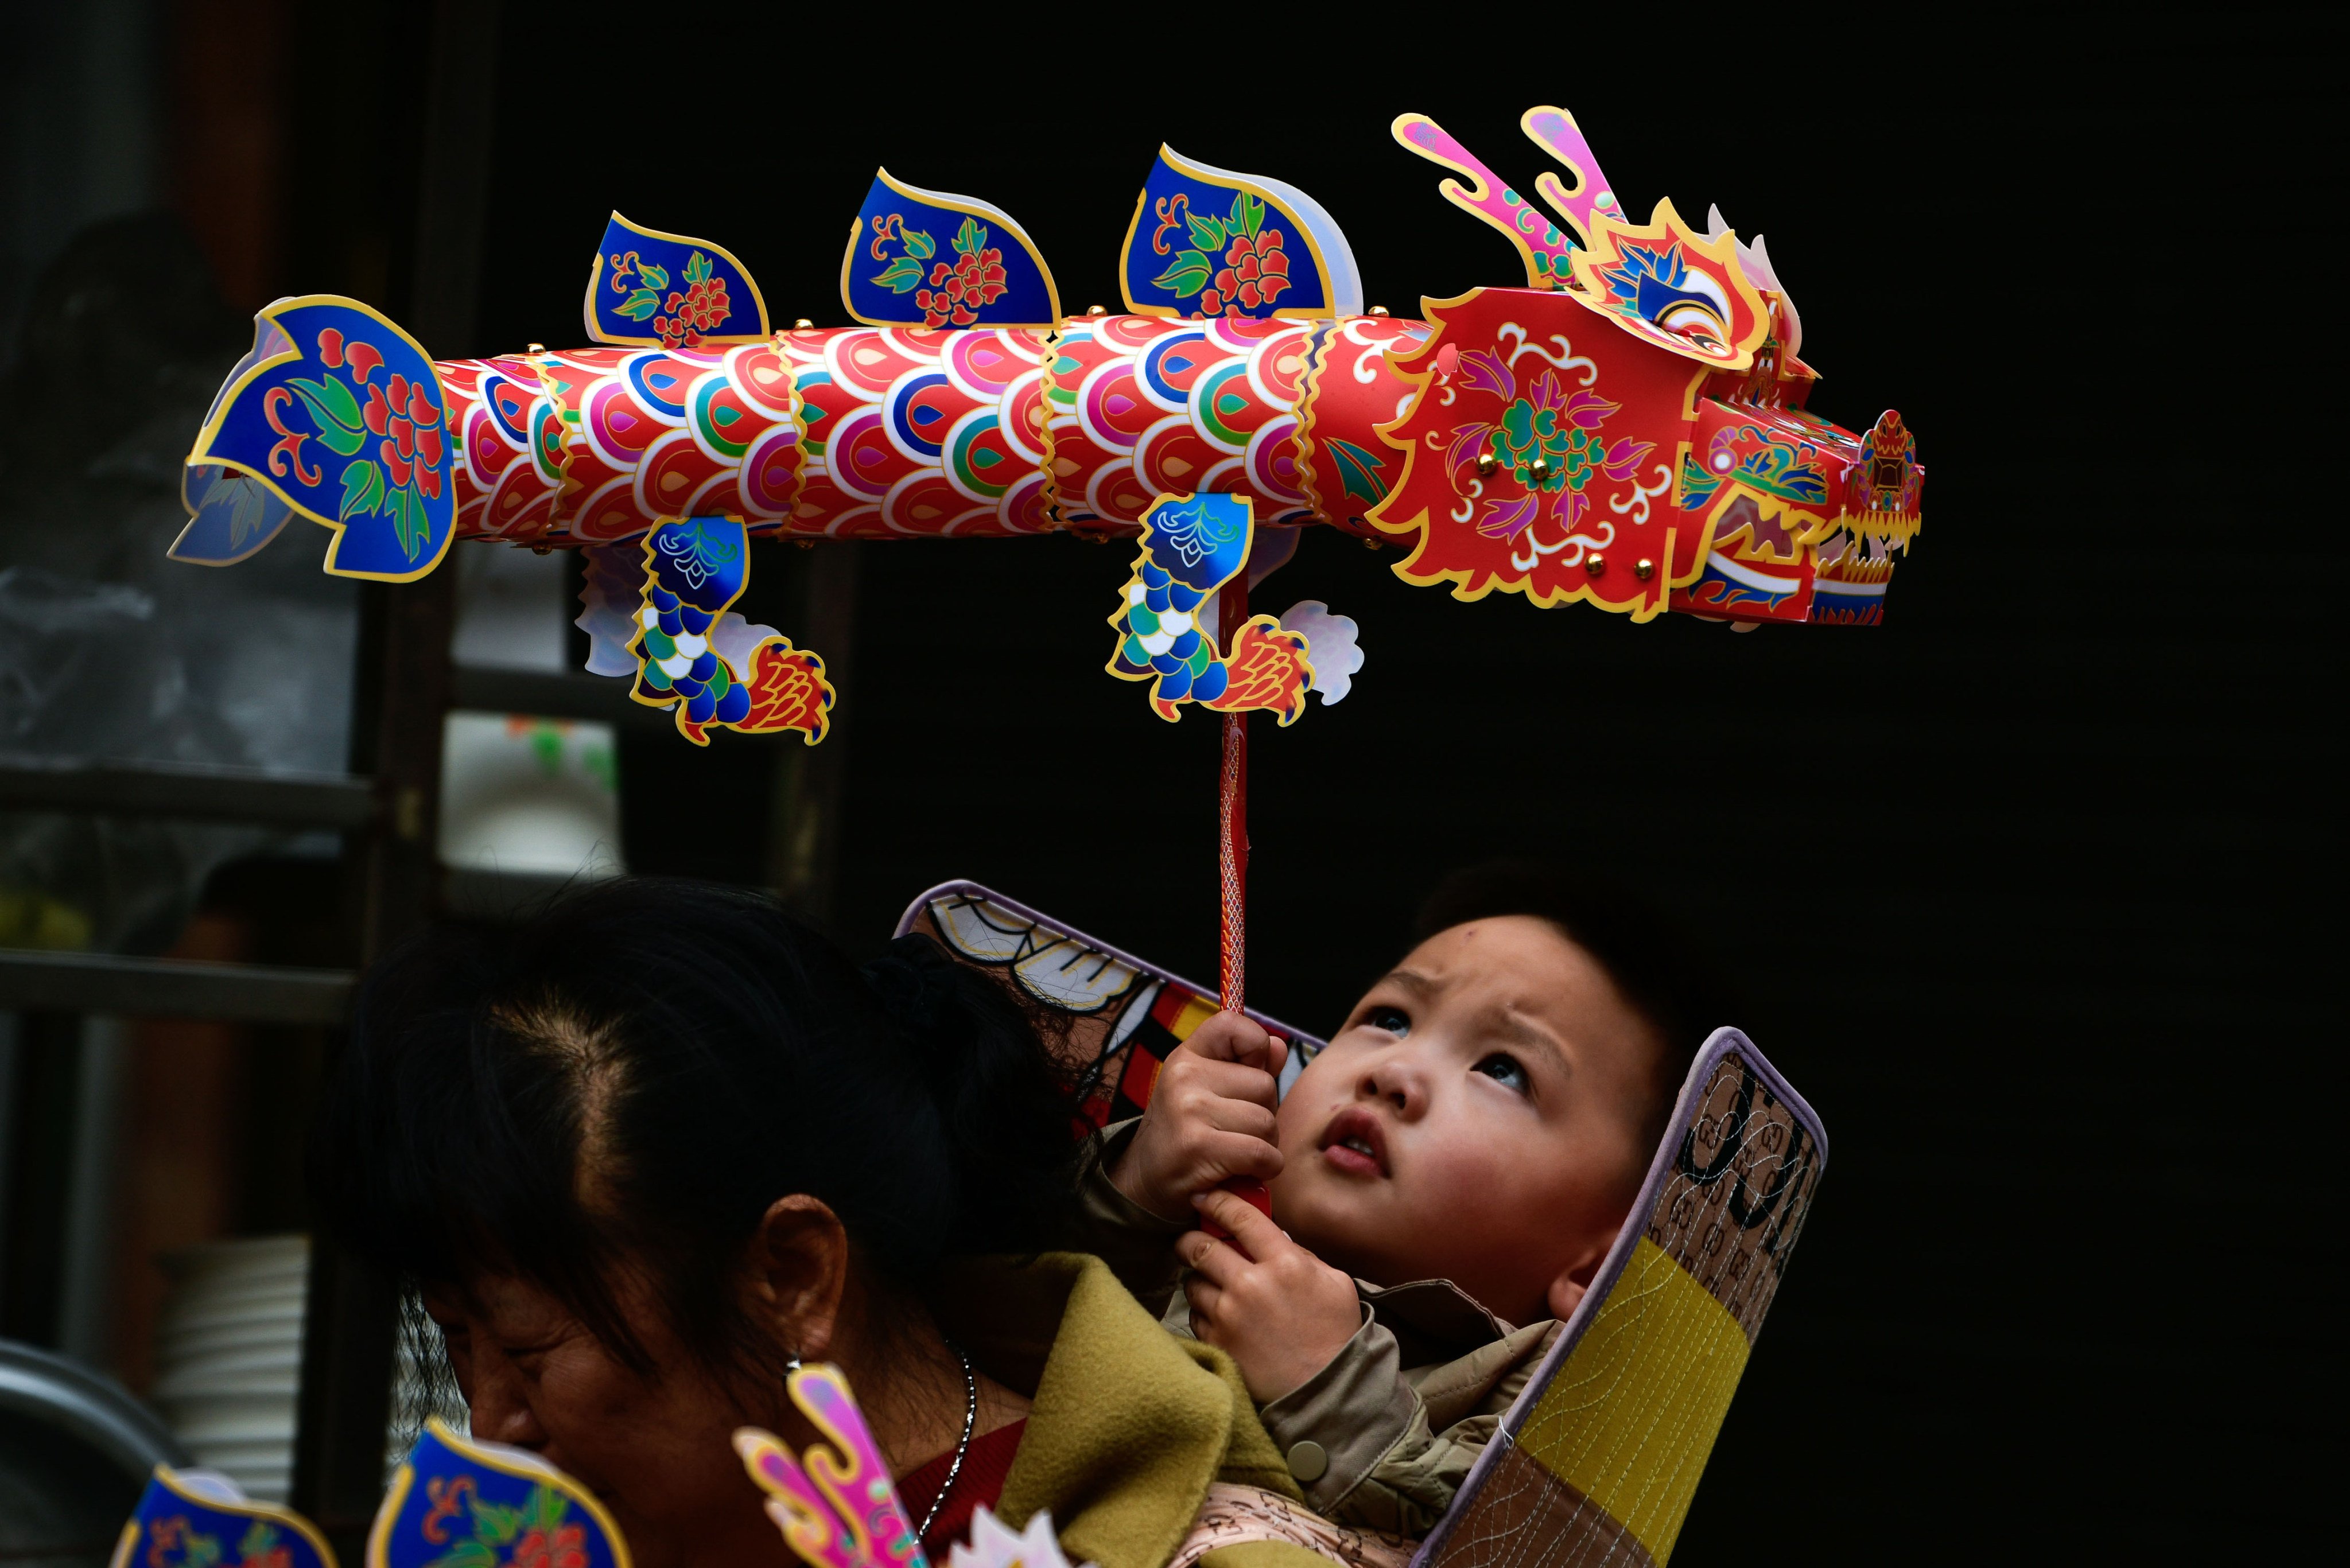 A child holds up a toy dragon in Shiqian county in China’s southwestern province of Guizhou on February 20. Chinese culture can be seen as influencing the English lexicon by adding new meanings to the word “dragon”. Photo: Xinhua